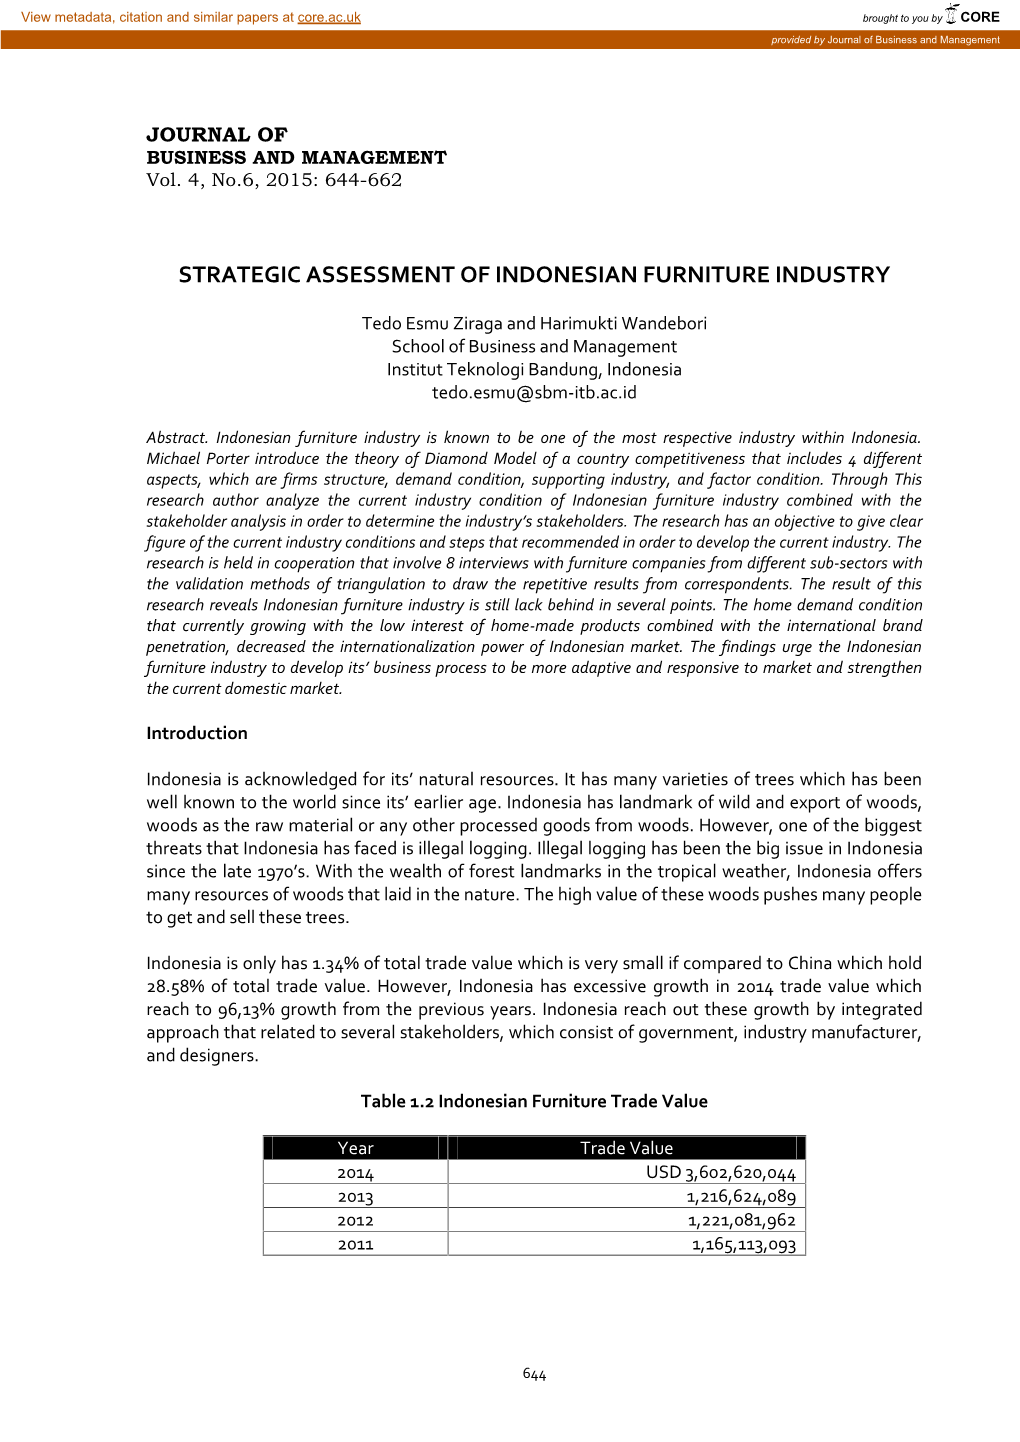 Strategic Assessment of Indonesian Furniture Industry